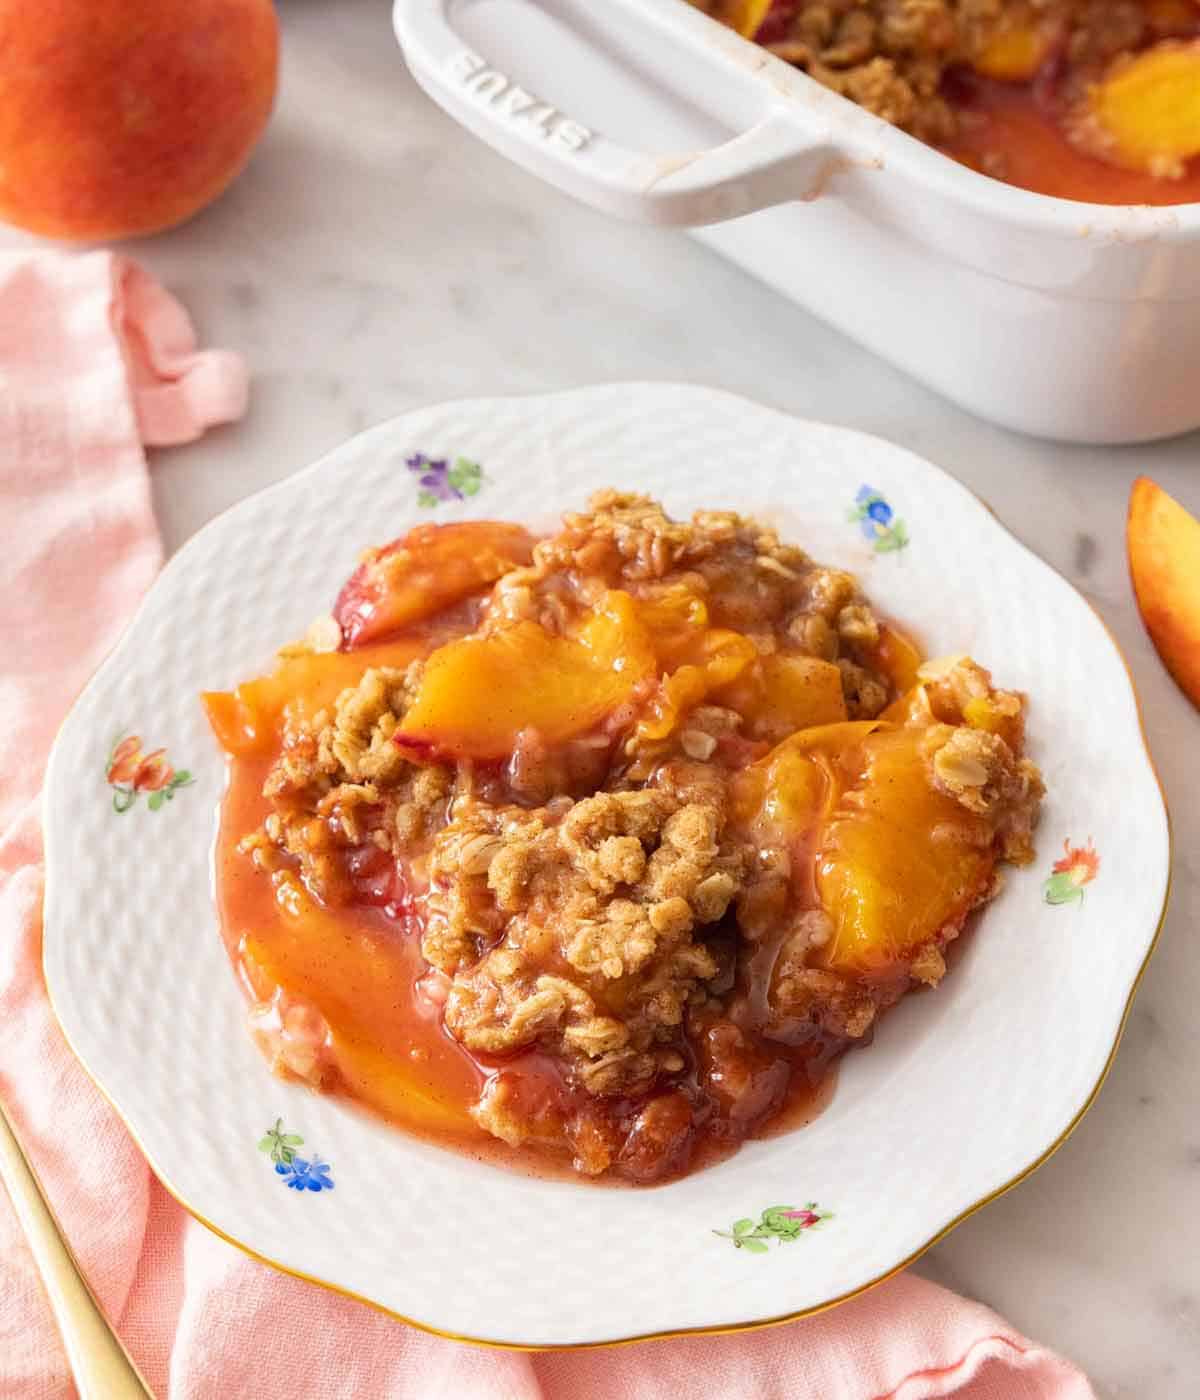 A plate of peach crisp with large chunks of peaches under the crispy oats on top of a pink napkin by a baking dish.